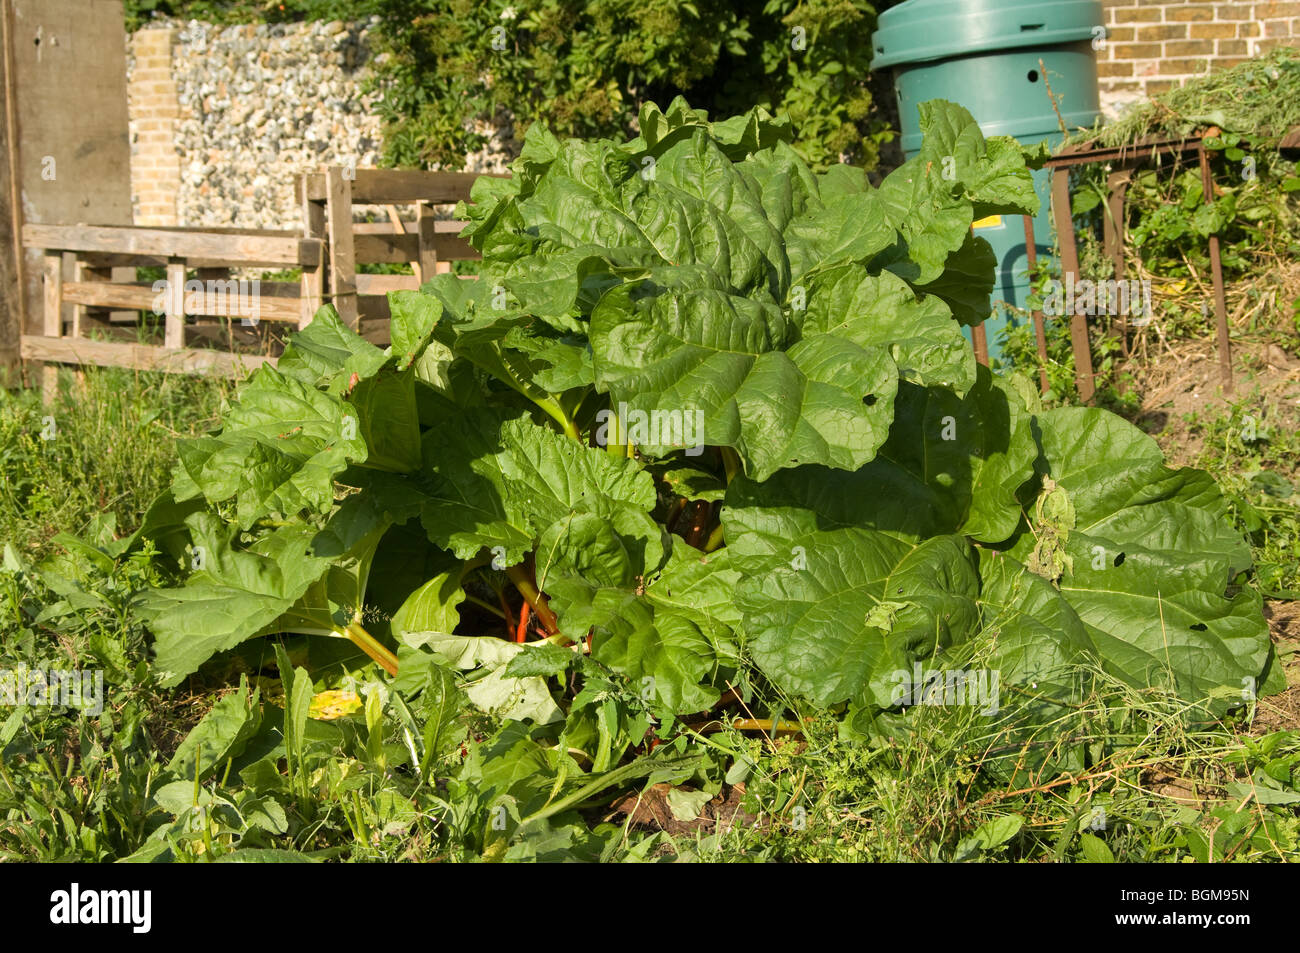 Rhubarb (Rheum rhabarbarum) growing on an allotment plot in front of compost heaps Stock Photo